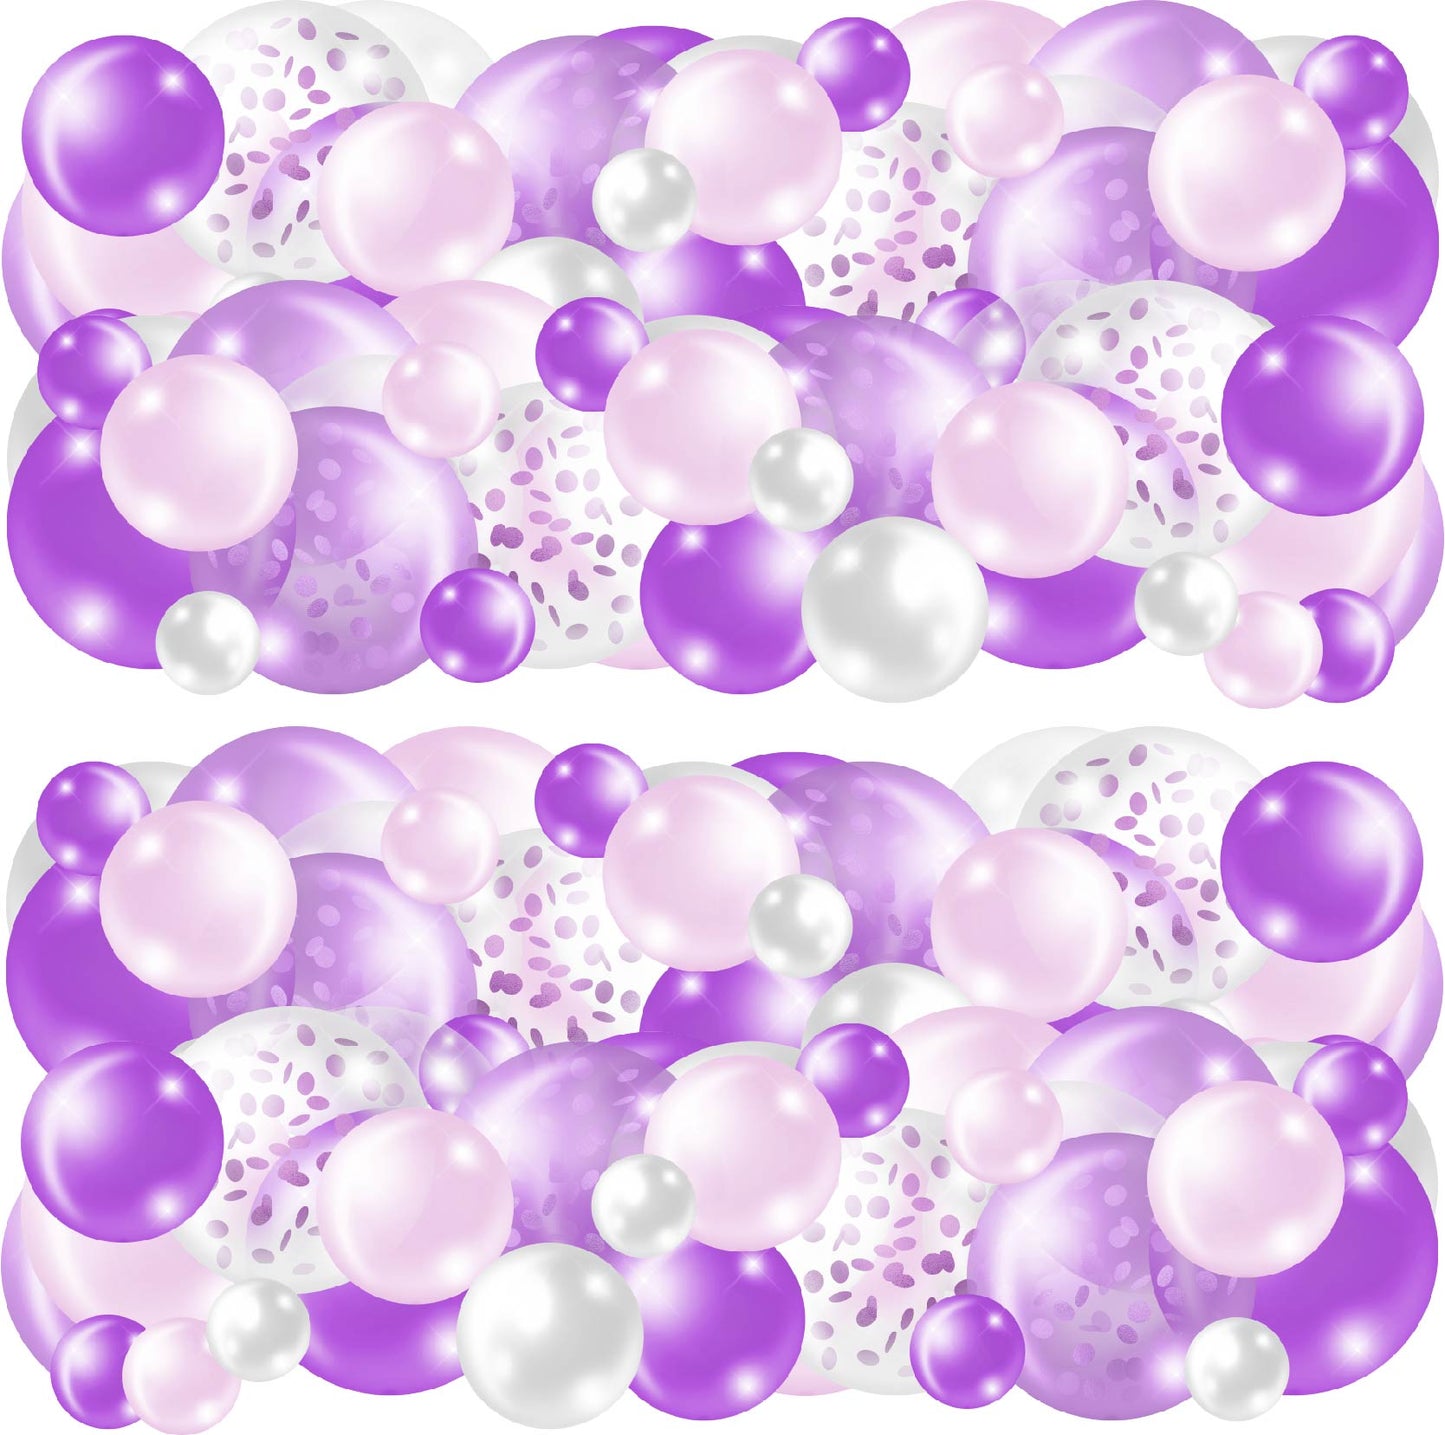 Purple and White Balloon Skirts Half Sheet  (Must Purchase 2 Half sheets - You Can Mix & Match)3